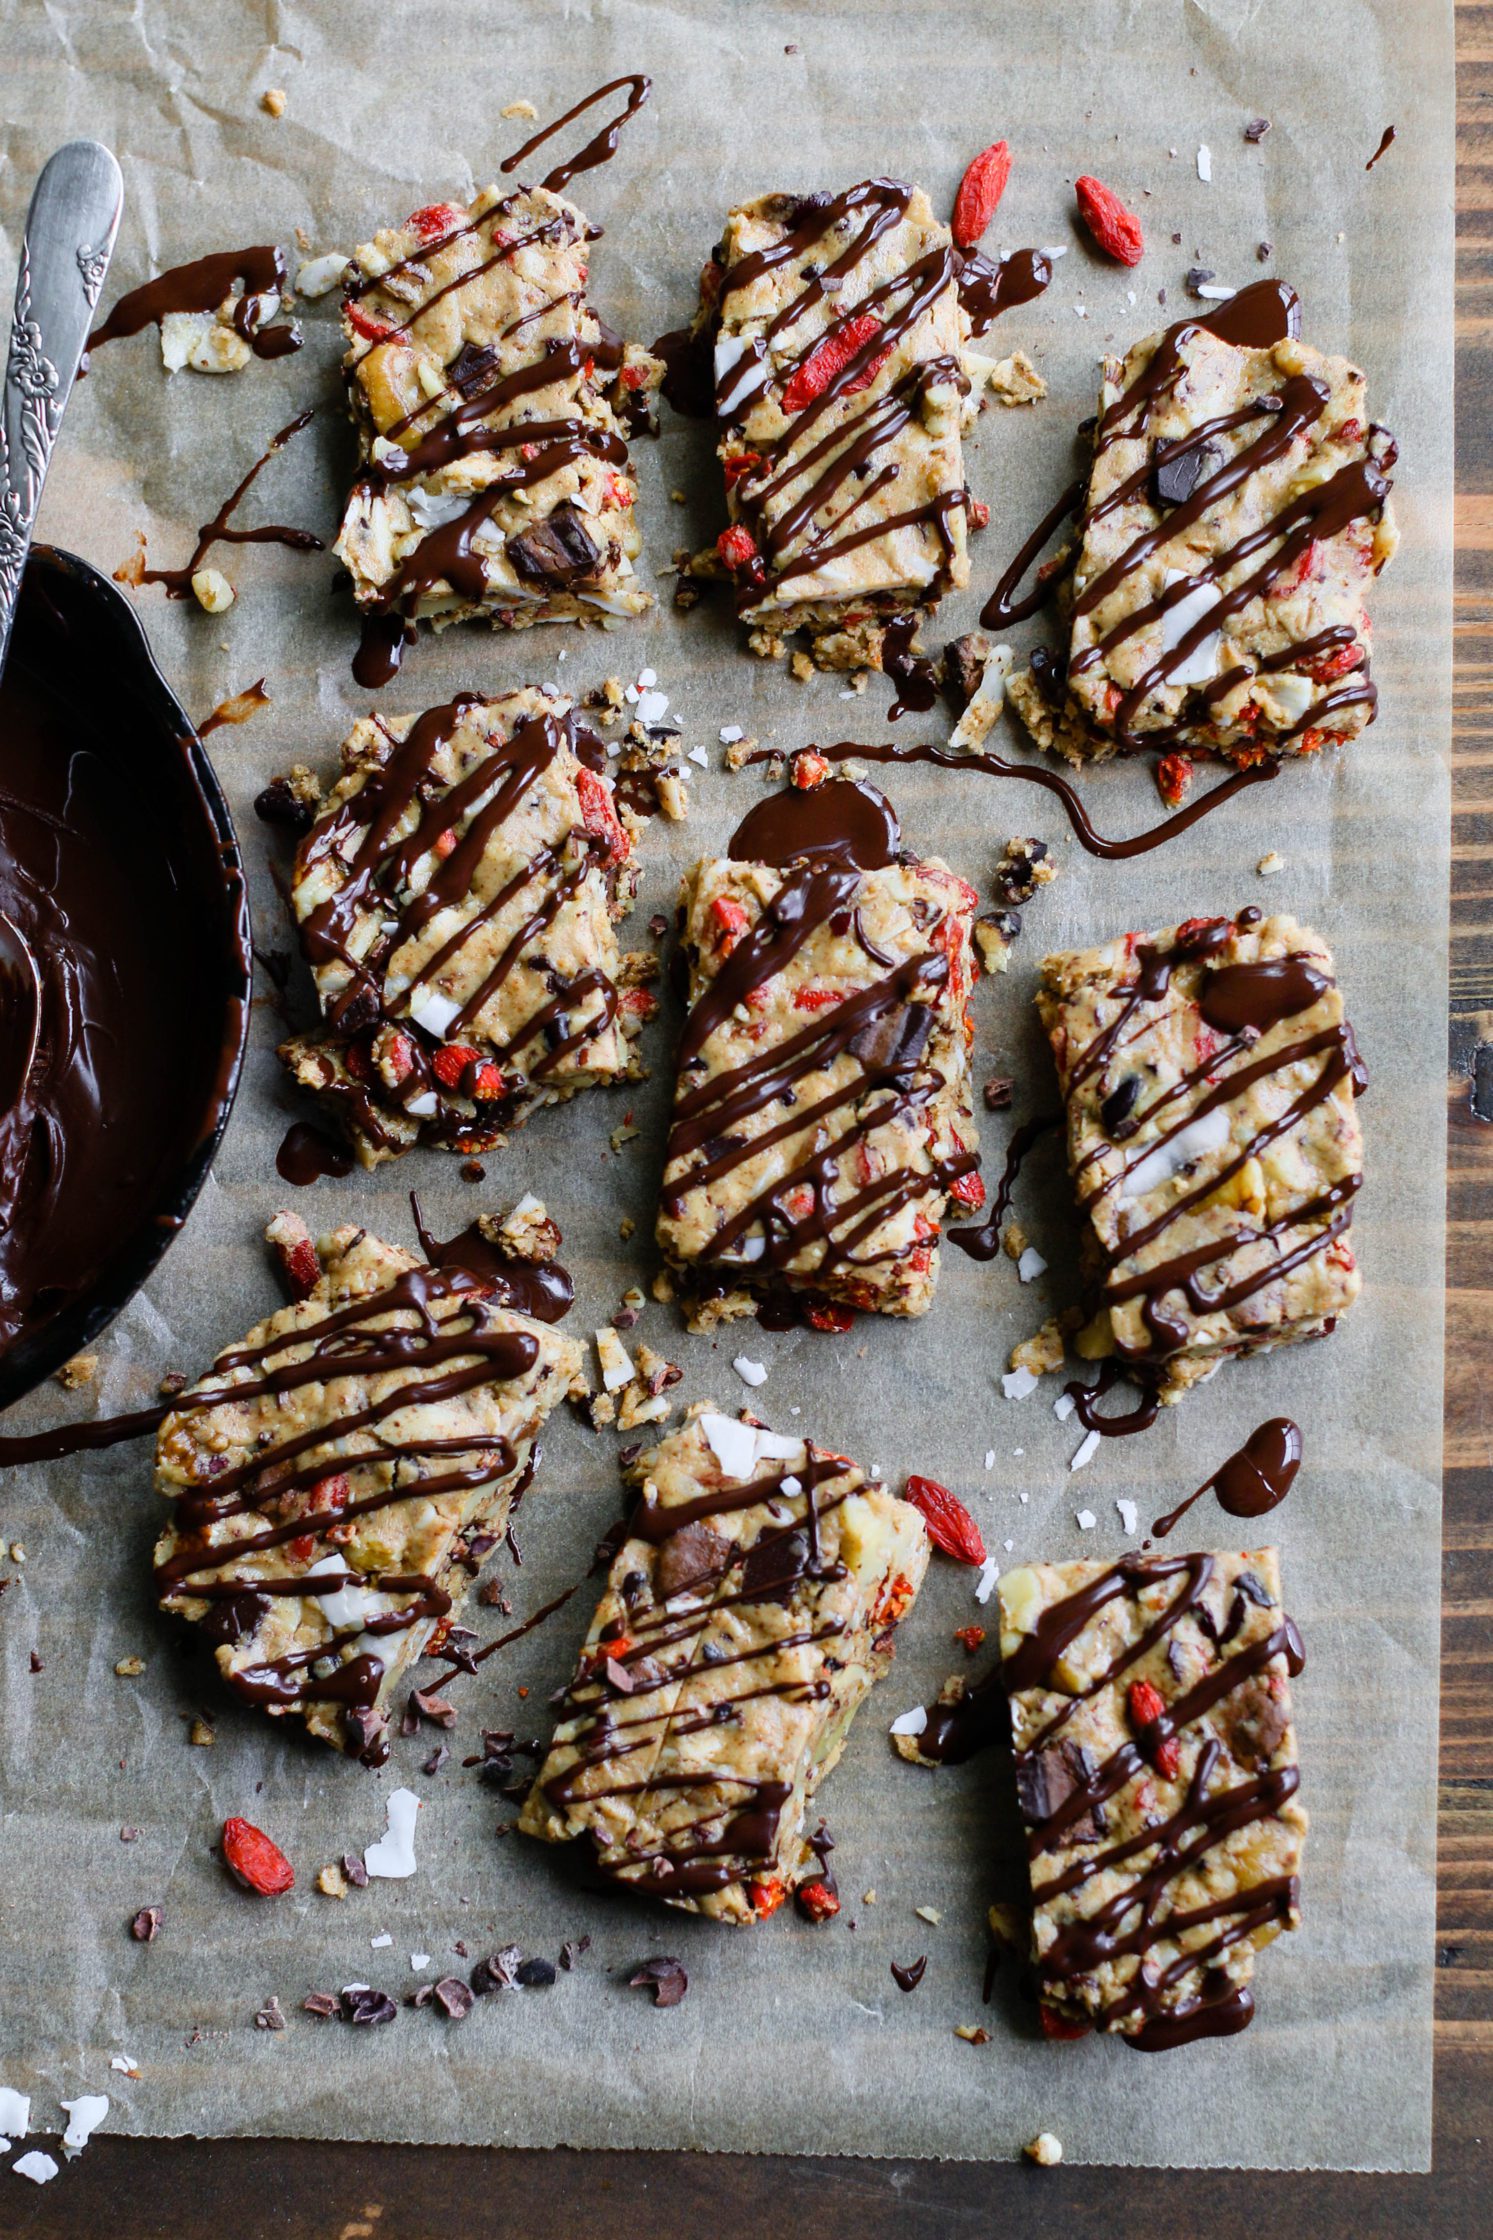 Raw Almond Butter Superfood Bars drizzled with dark chocolate on parchment paper by Flora & Vino